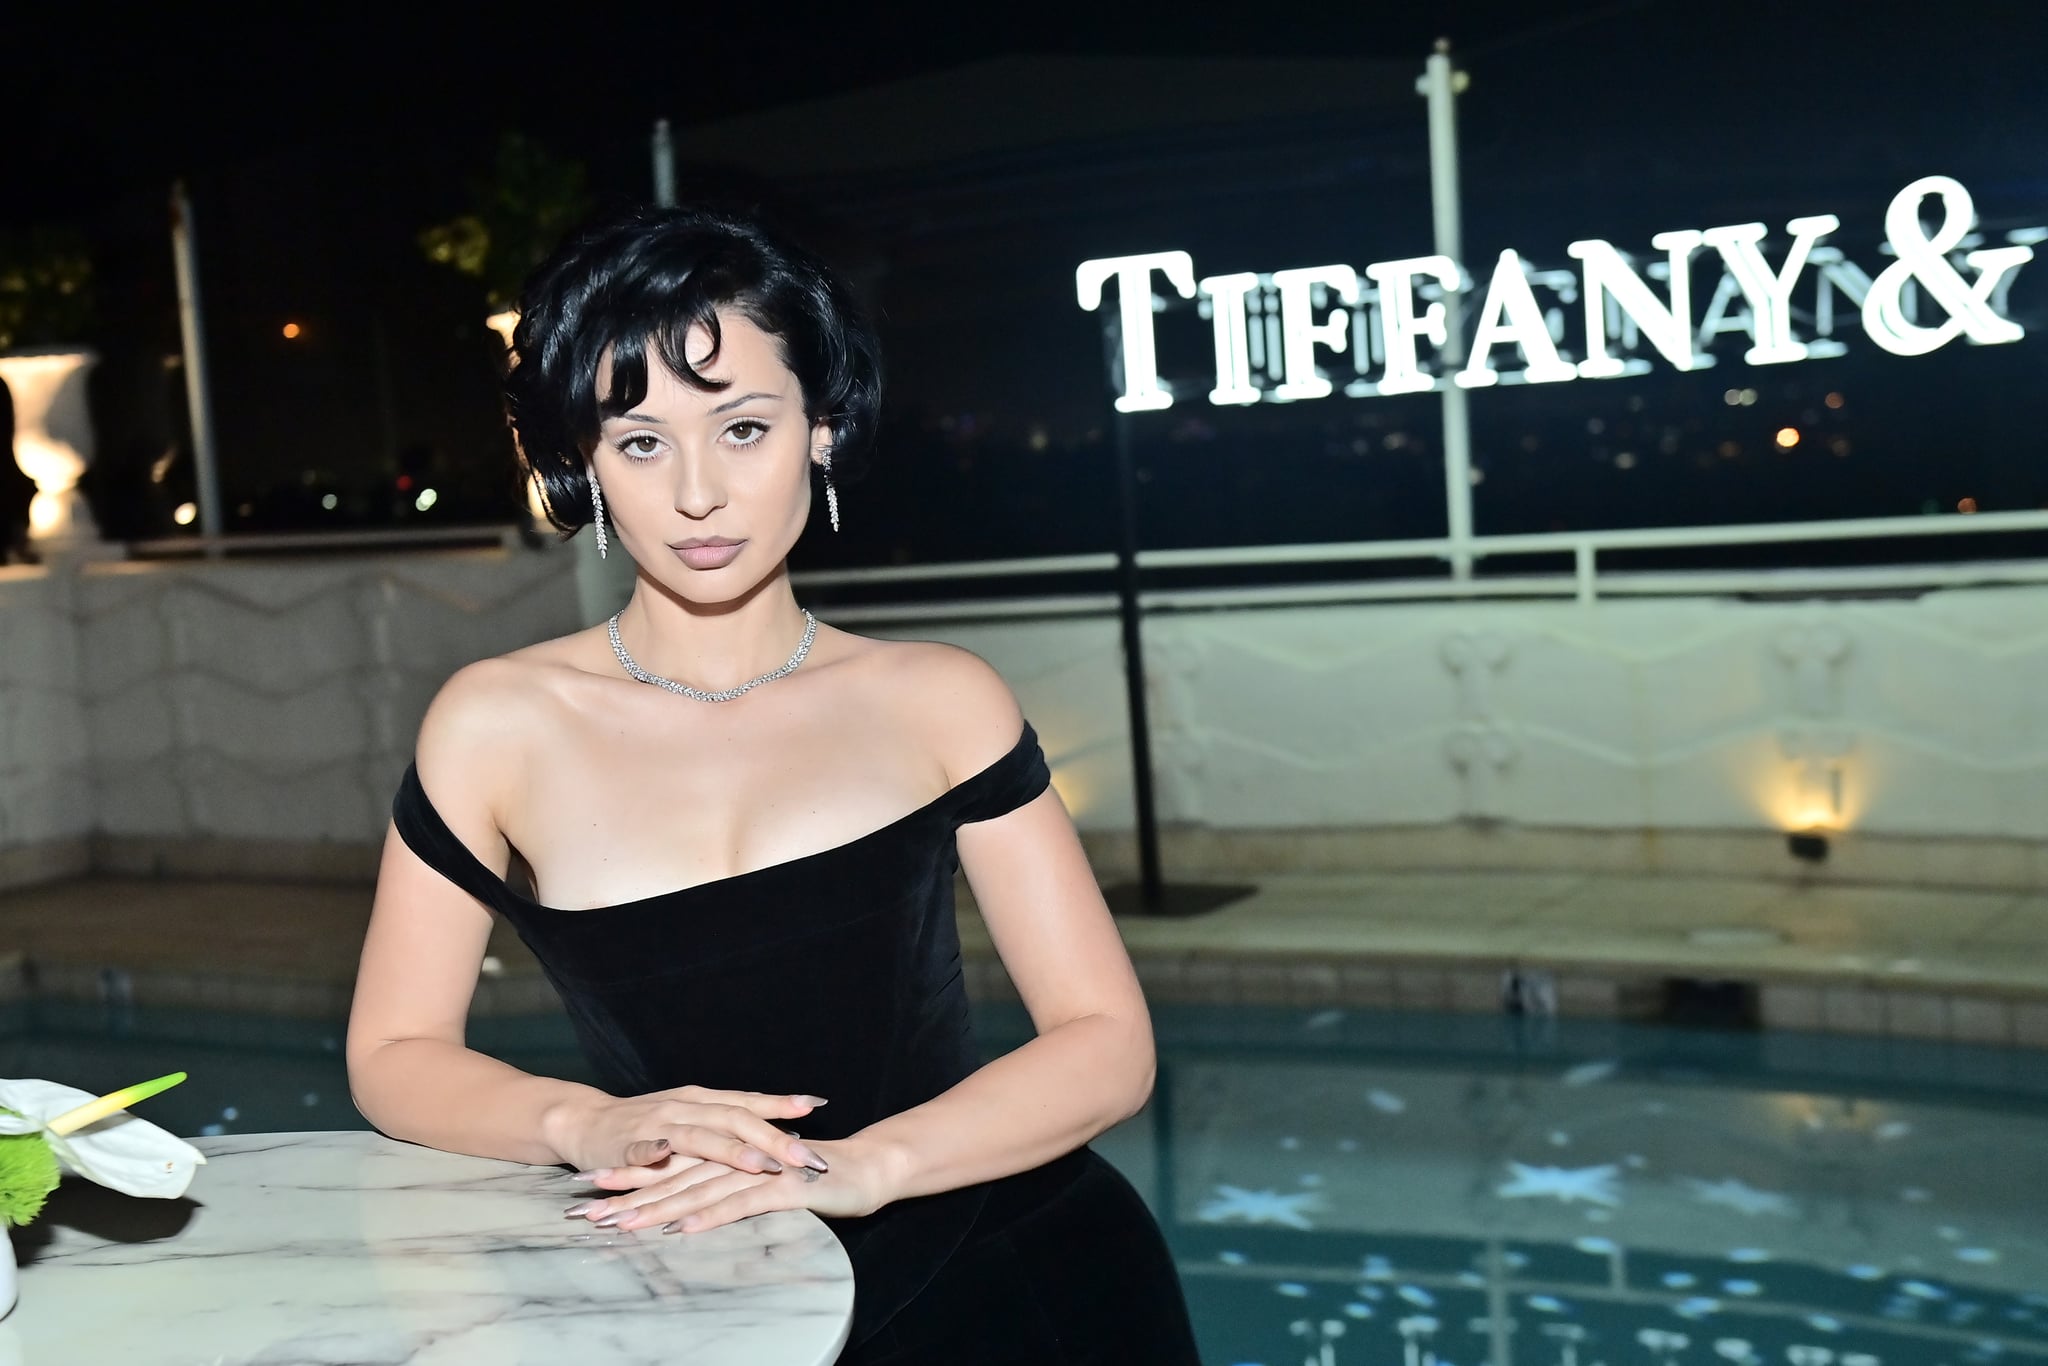 LOS ANGELES, CALIFORNIA - OCTOBER 26: Alexa Demie attends as Tiffany & Co. celebrates the launch of the Lock Collection at Sunset Tower Hotel on October 26, 2022 in Los Angeles, California. (Photo by Stefanie Keenan/Getty Images for Tiffany & Co.)